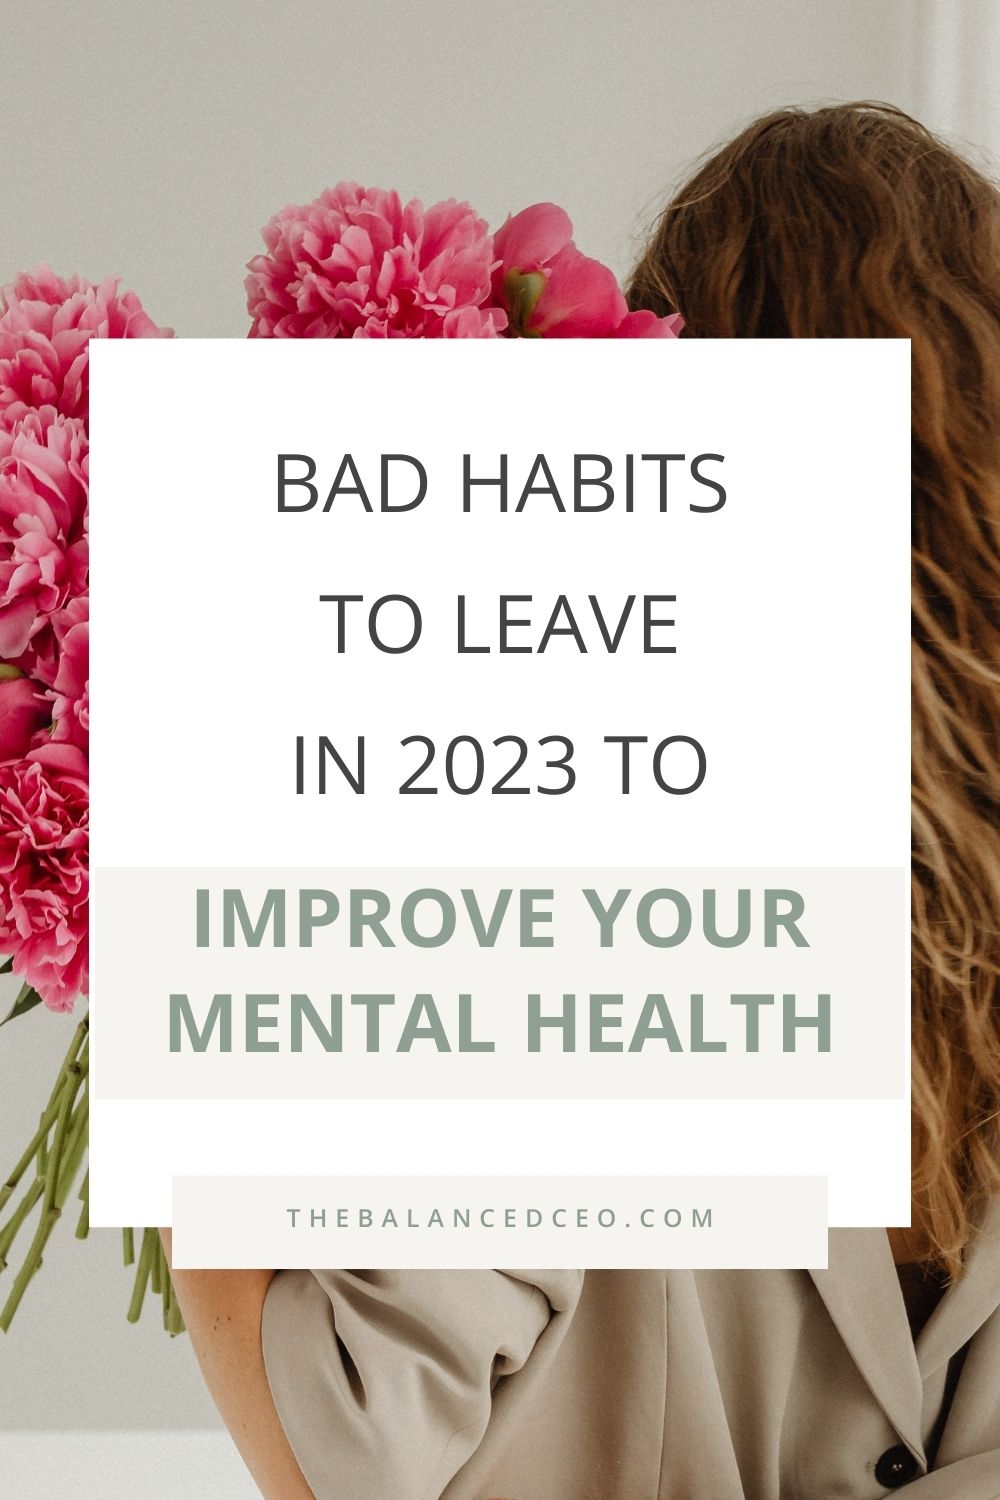 Bad Habits to Leave in 2023 to Improve Your Mental Health